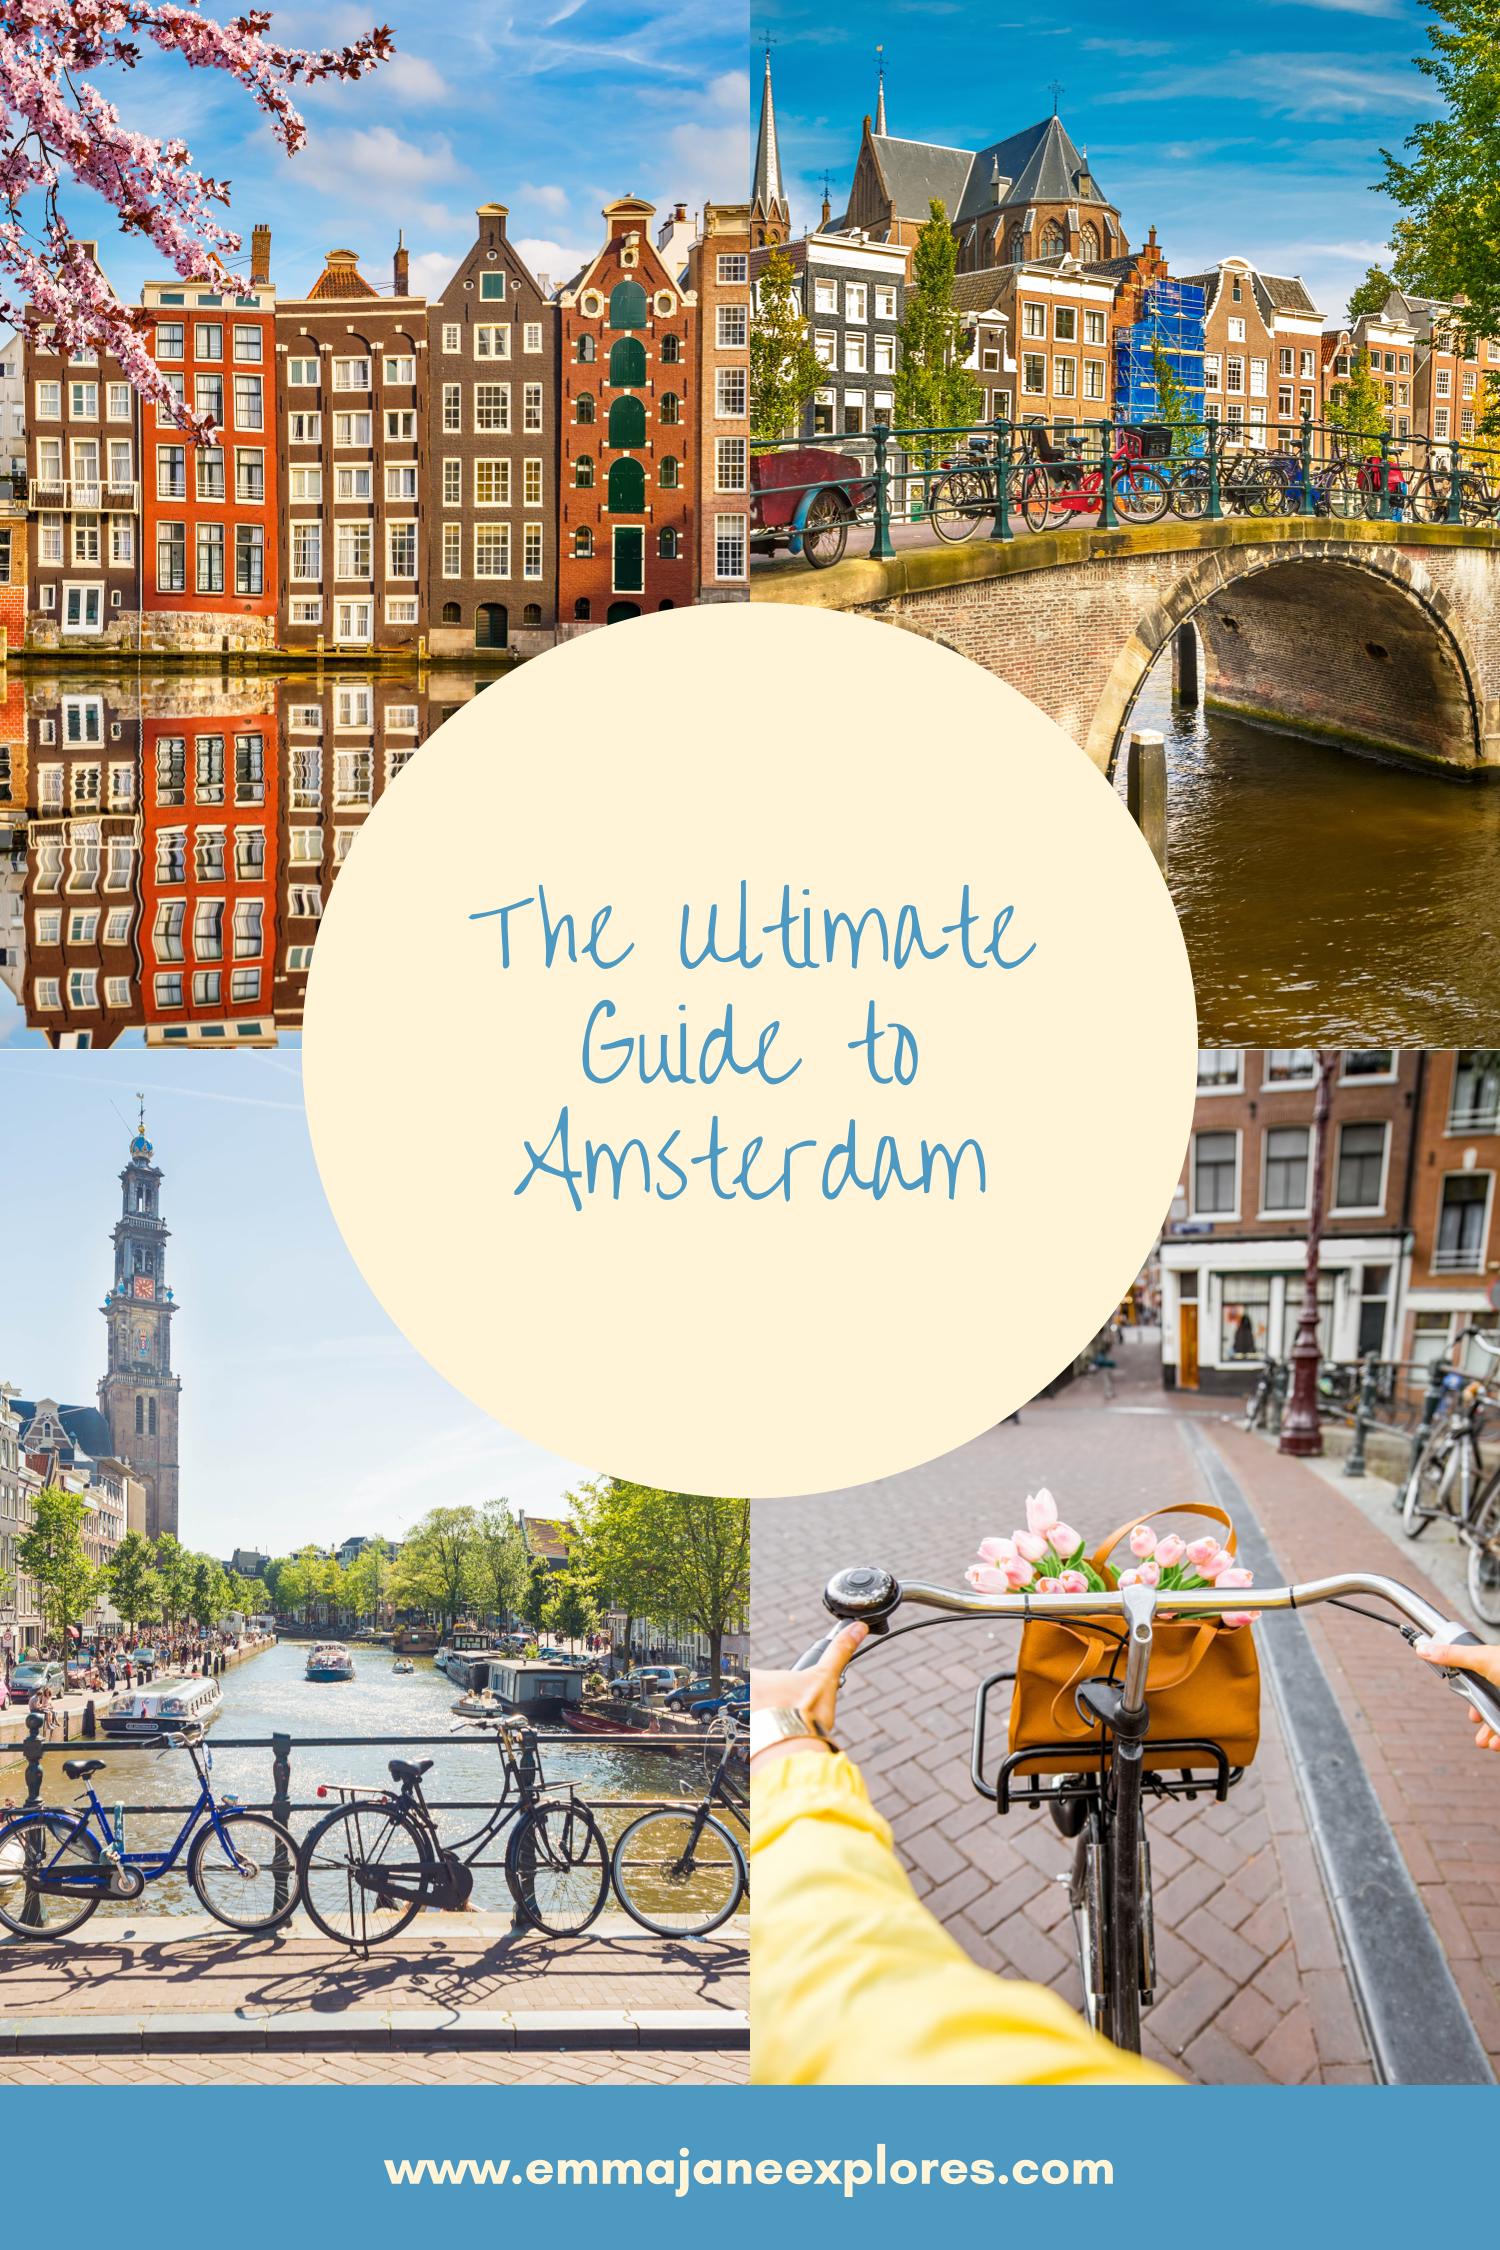 Exploring Amsterdam with the Amsterdam City Pass - Emma Jane Explores